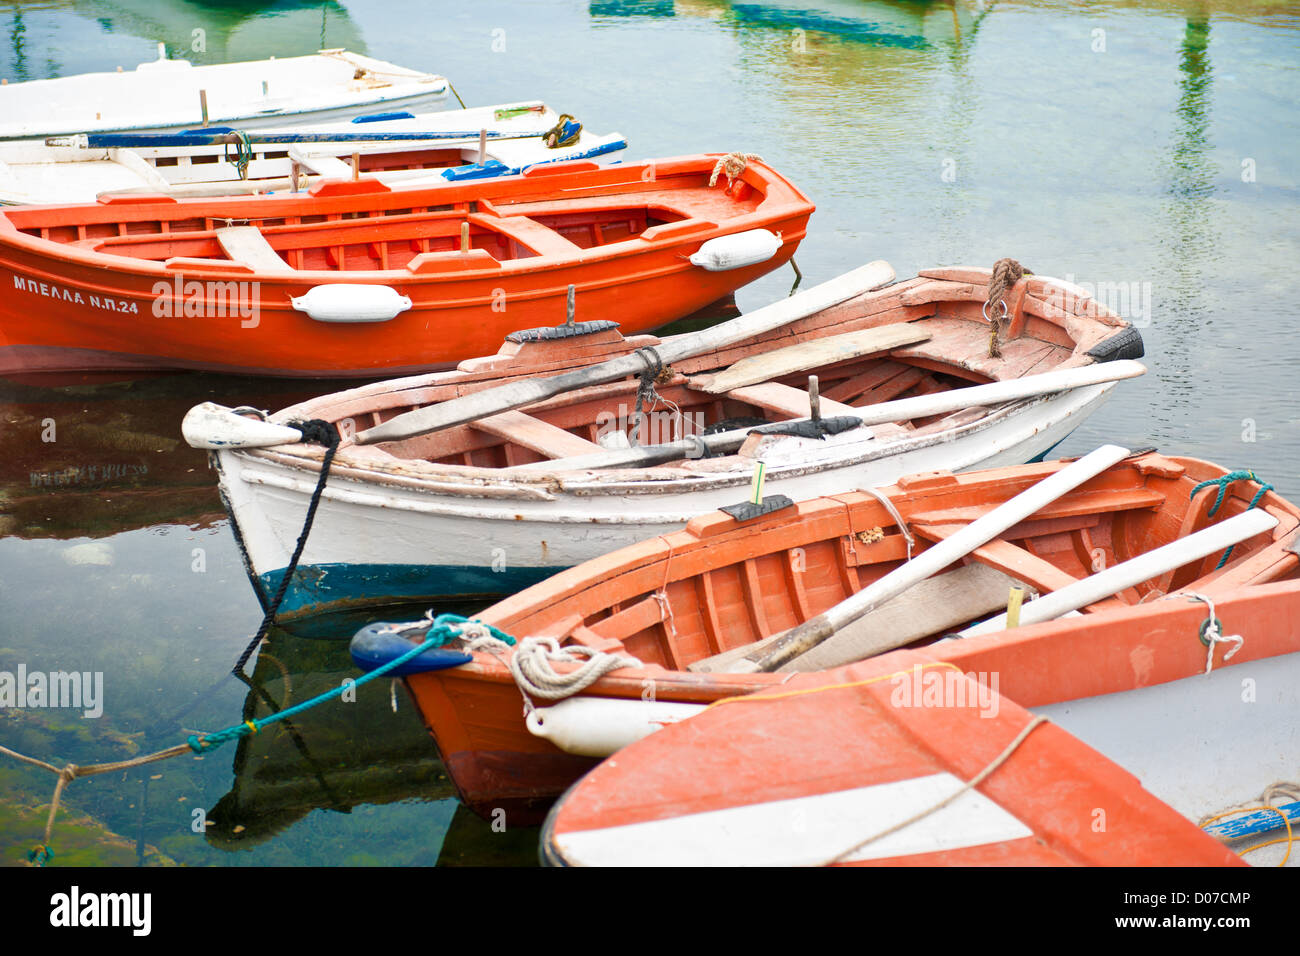 Colorful wooden row boats moored in a harbor in Aliki, on the island of Paros, Greece Stock Photo